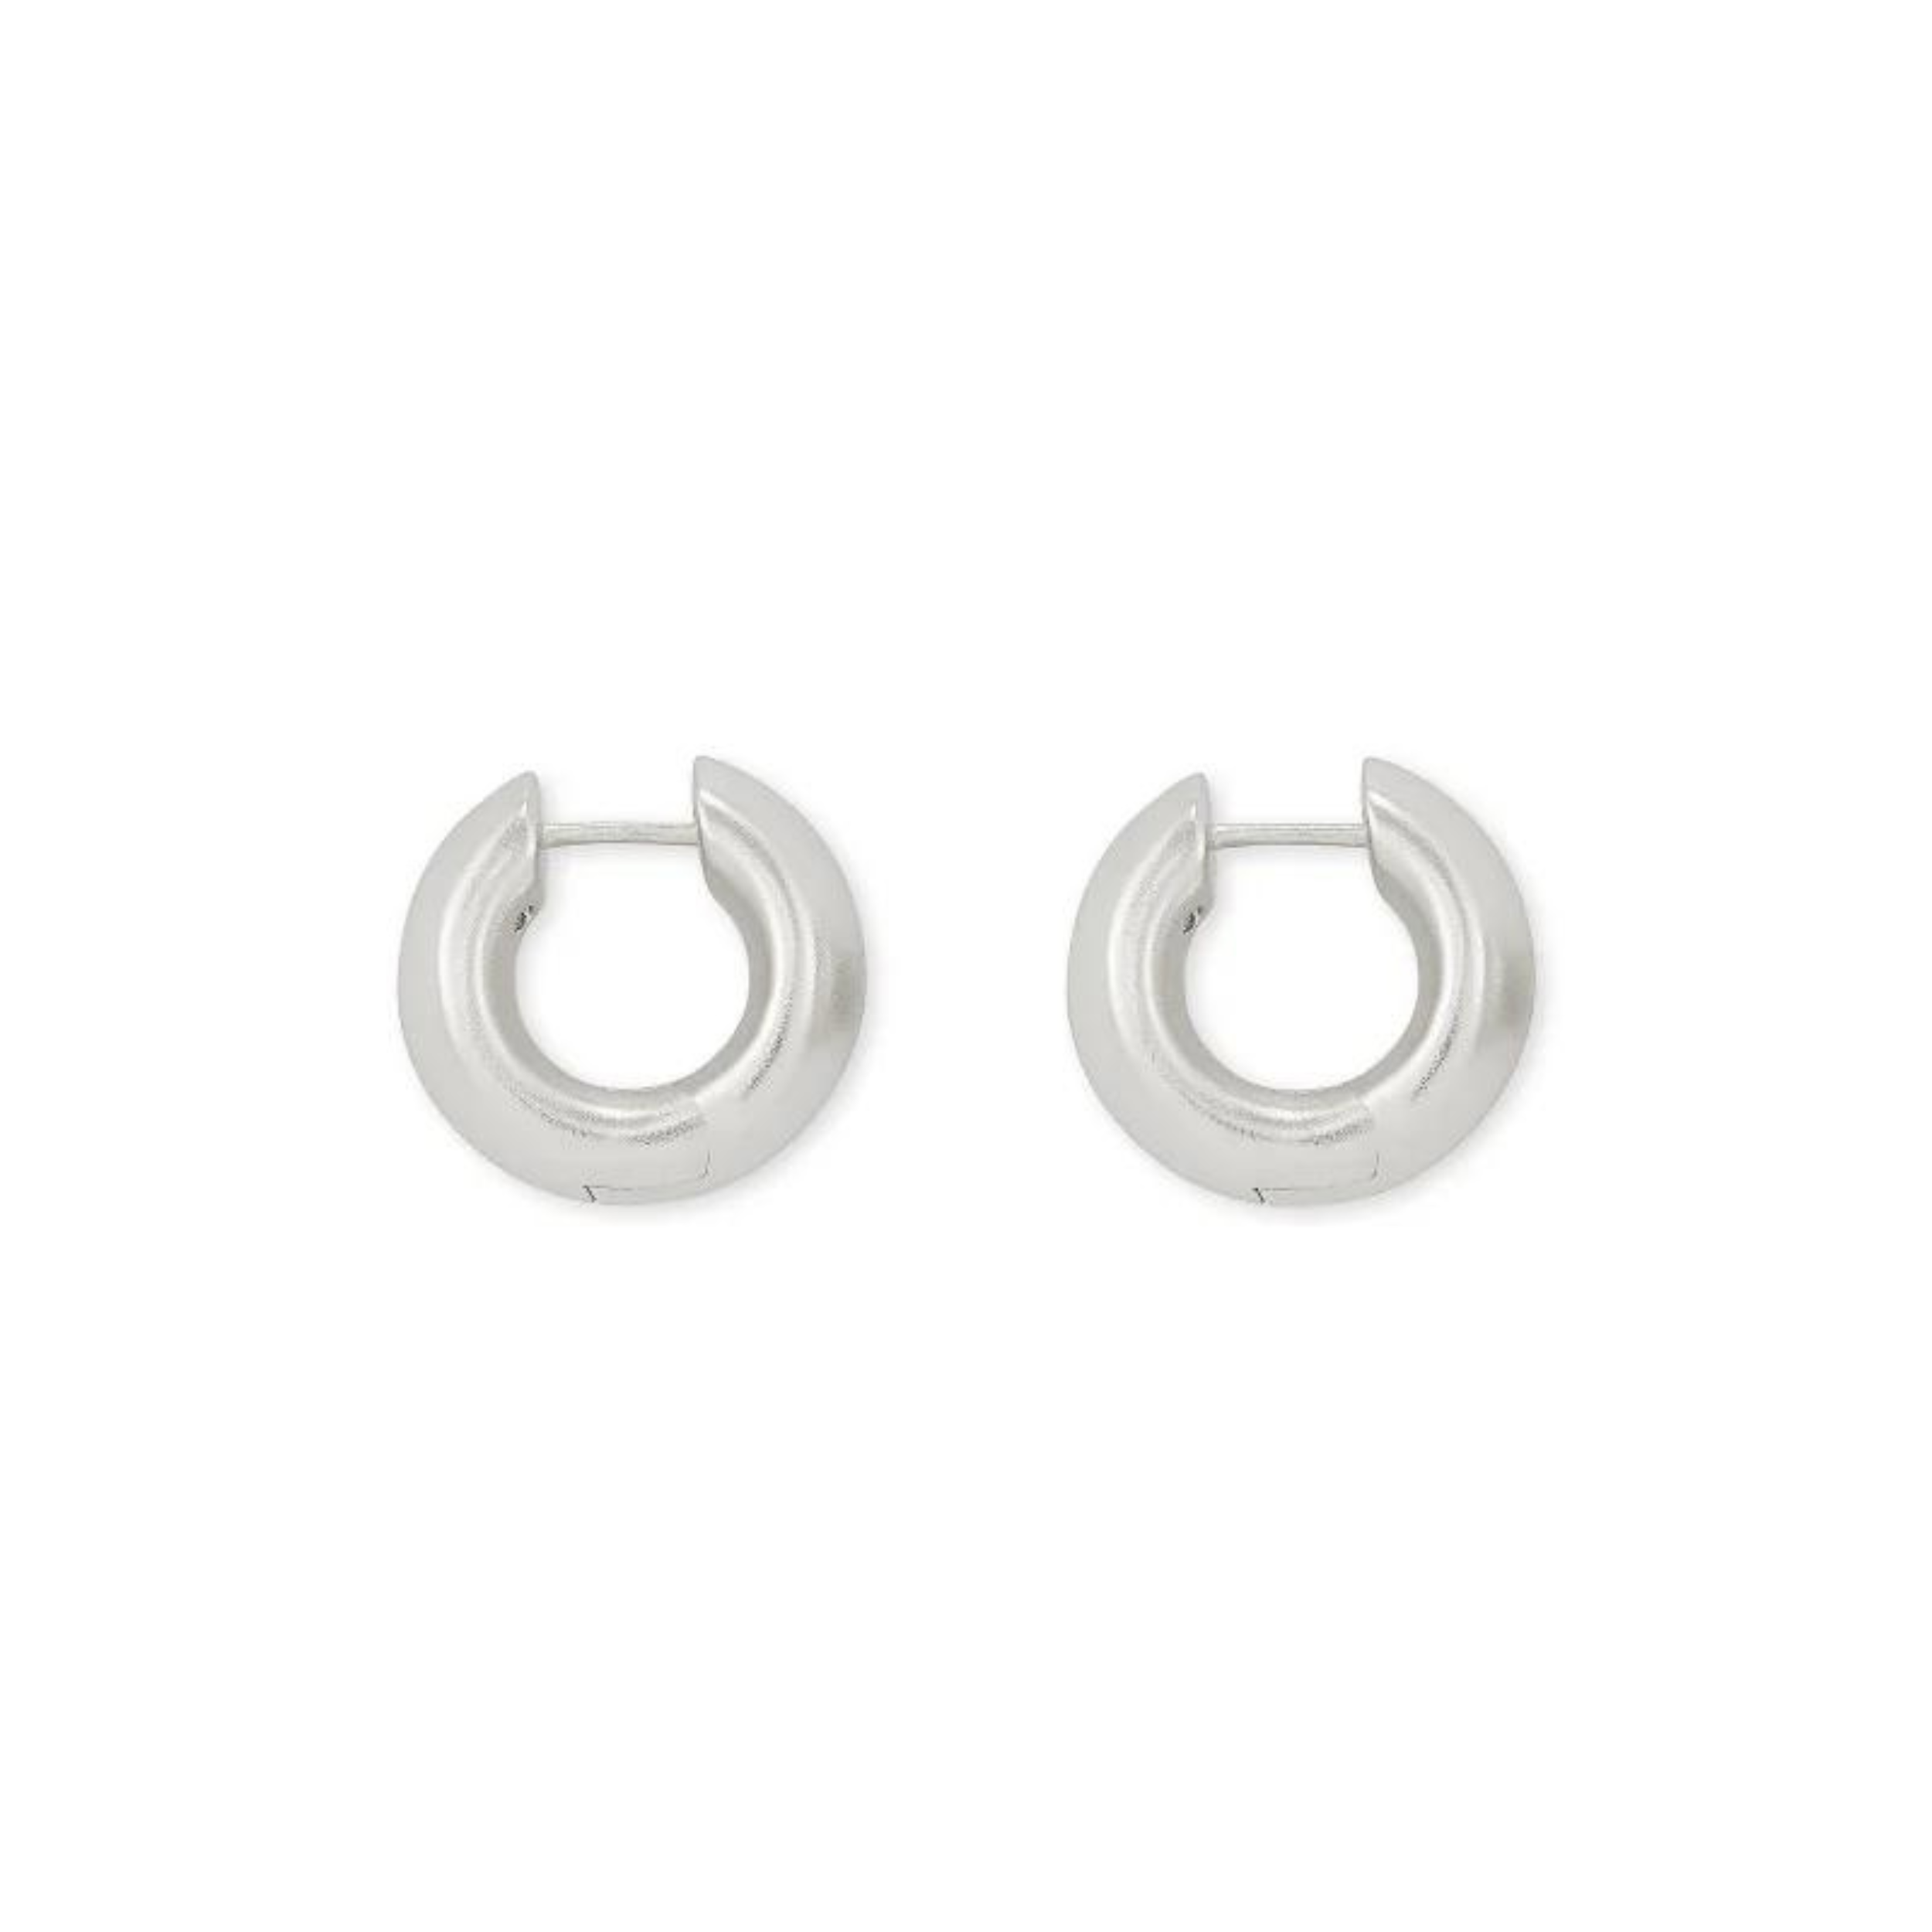 Silver huggie hoops pictured on a white background.